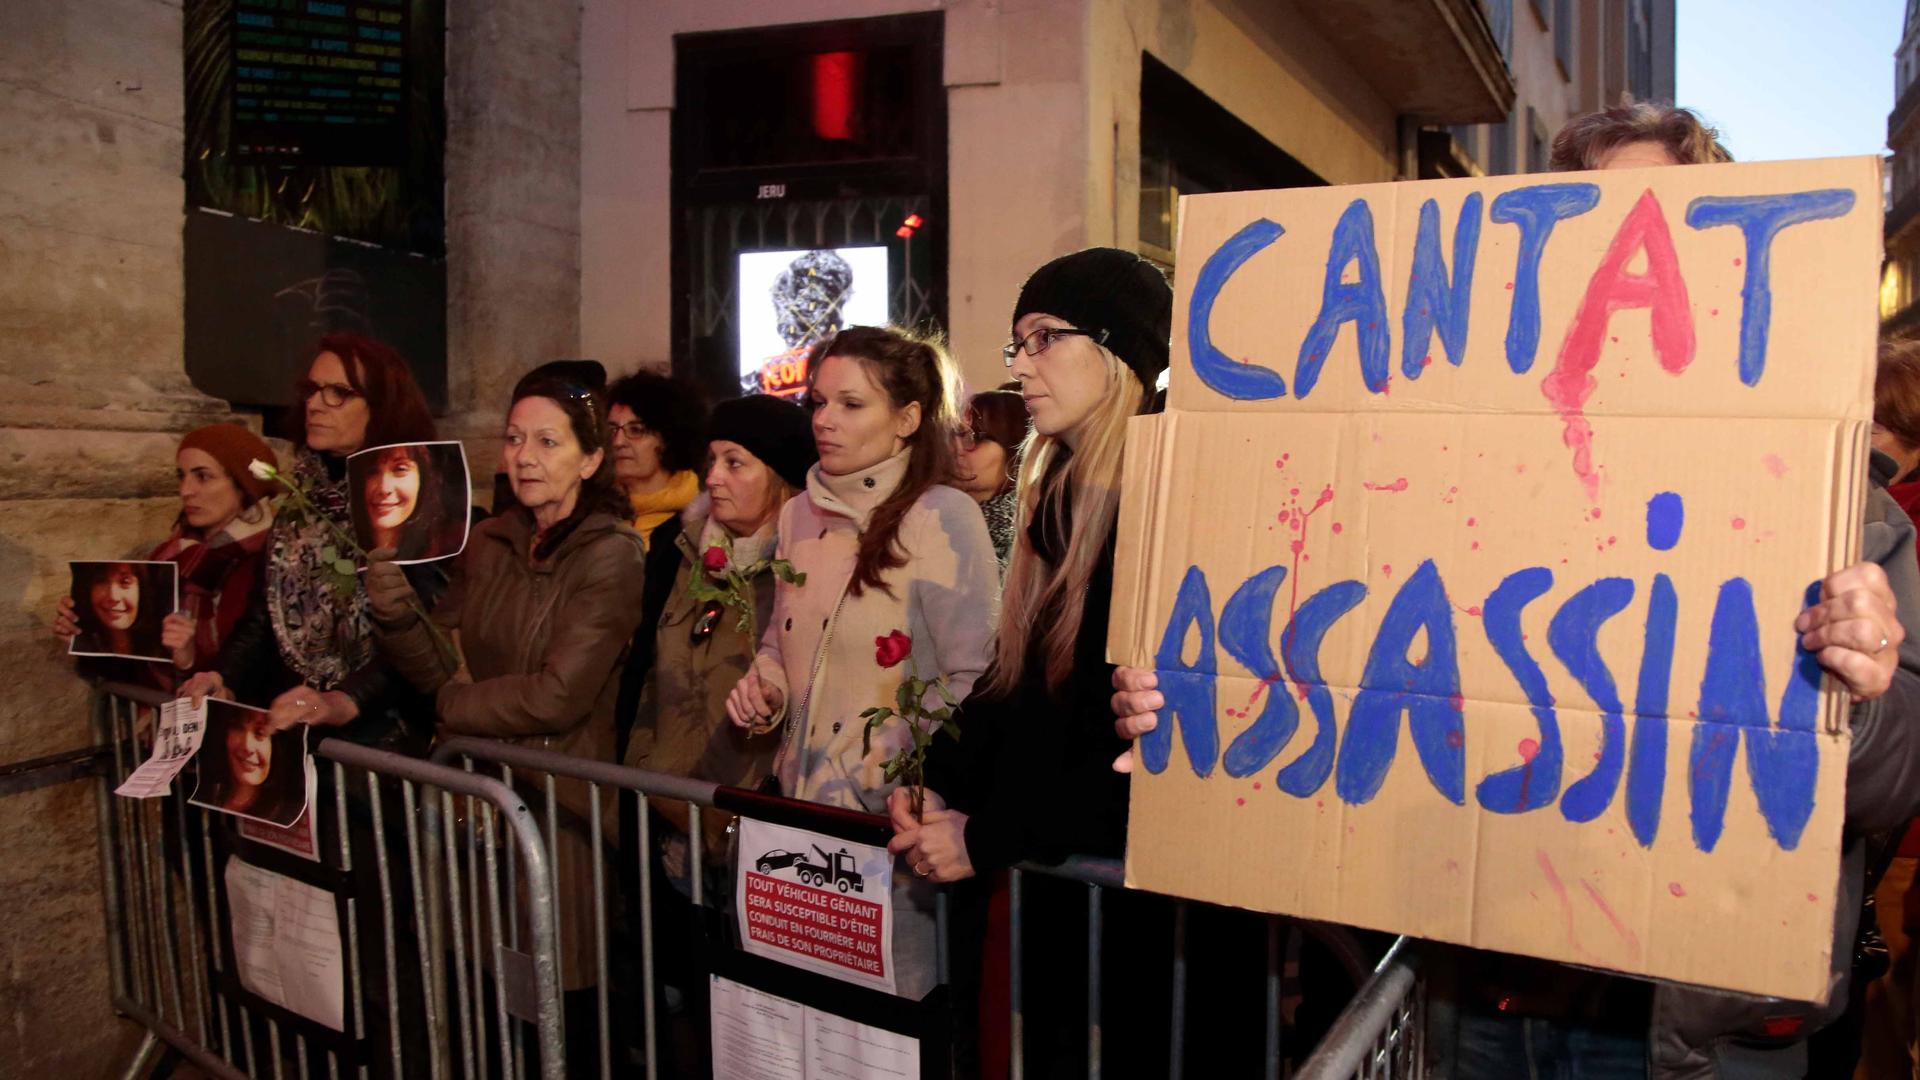 A crowd stands behind a metal gate. One holds a sign that says "Cantat assassin"